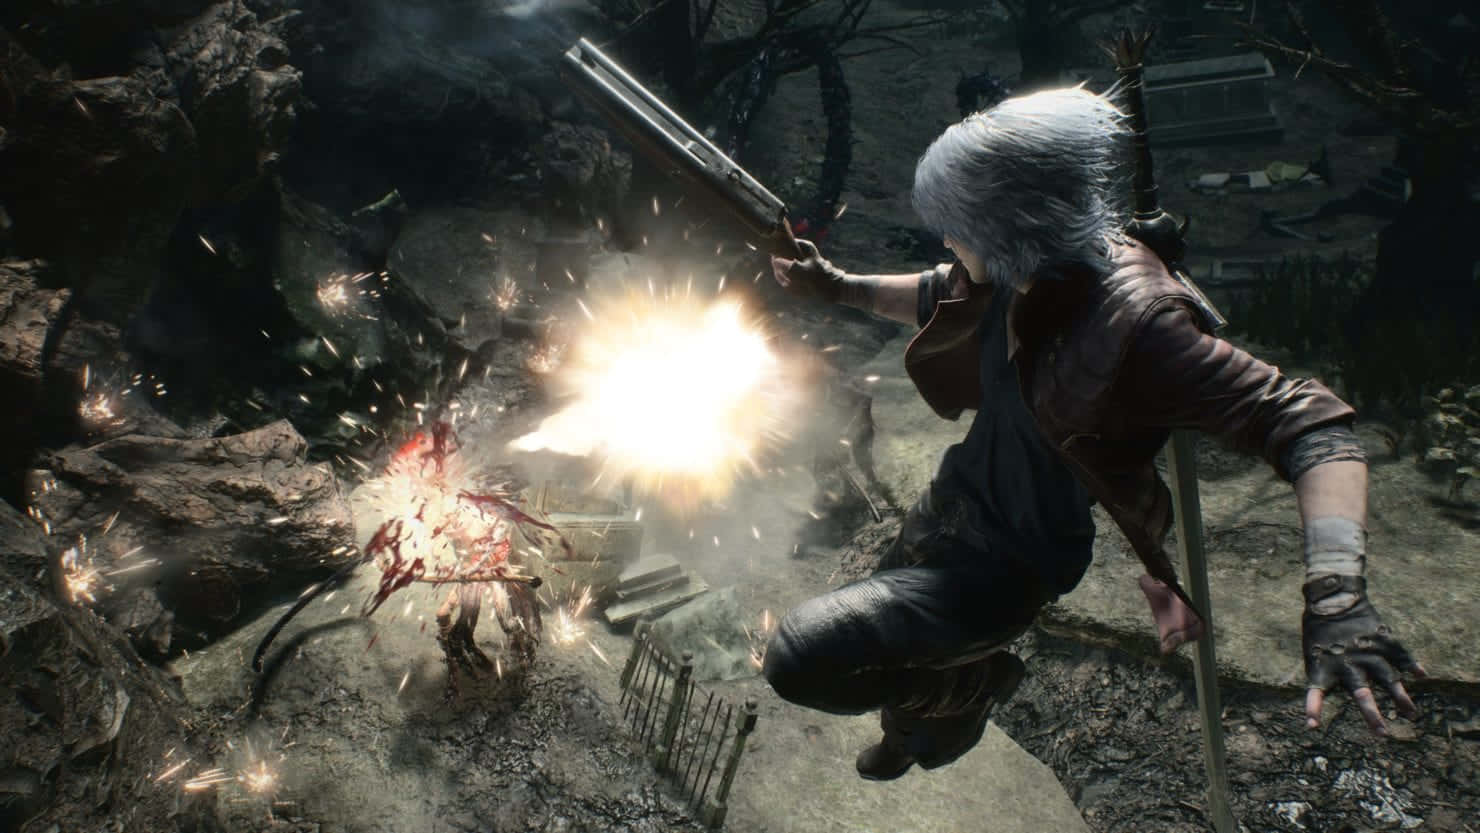 Devil May Cry Characters in Action Wallpaper